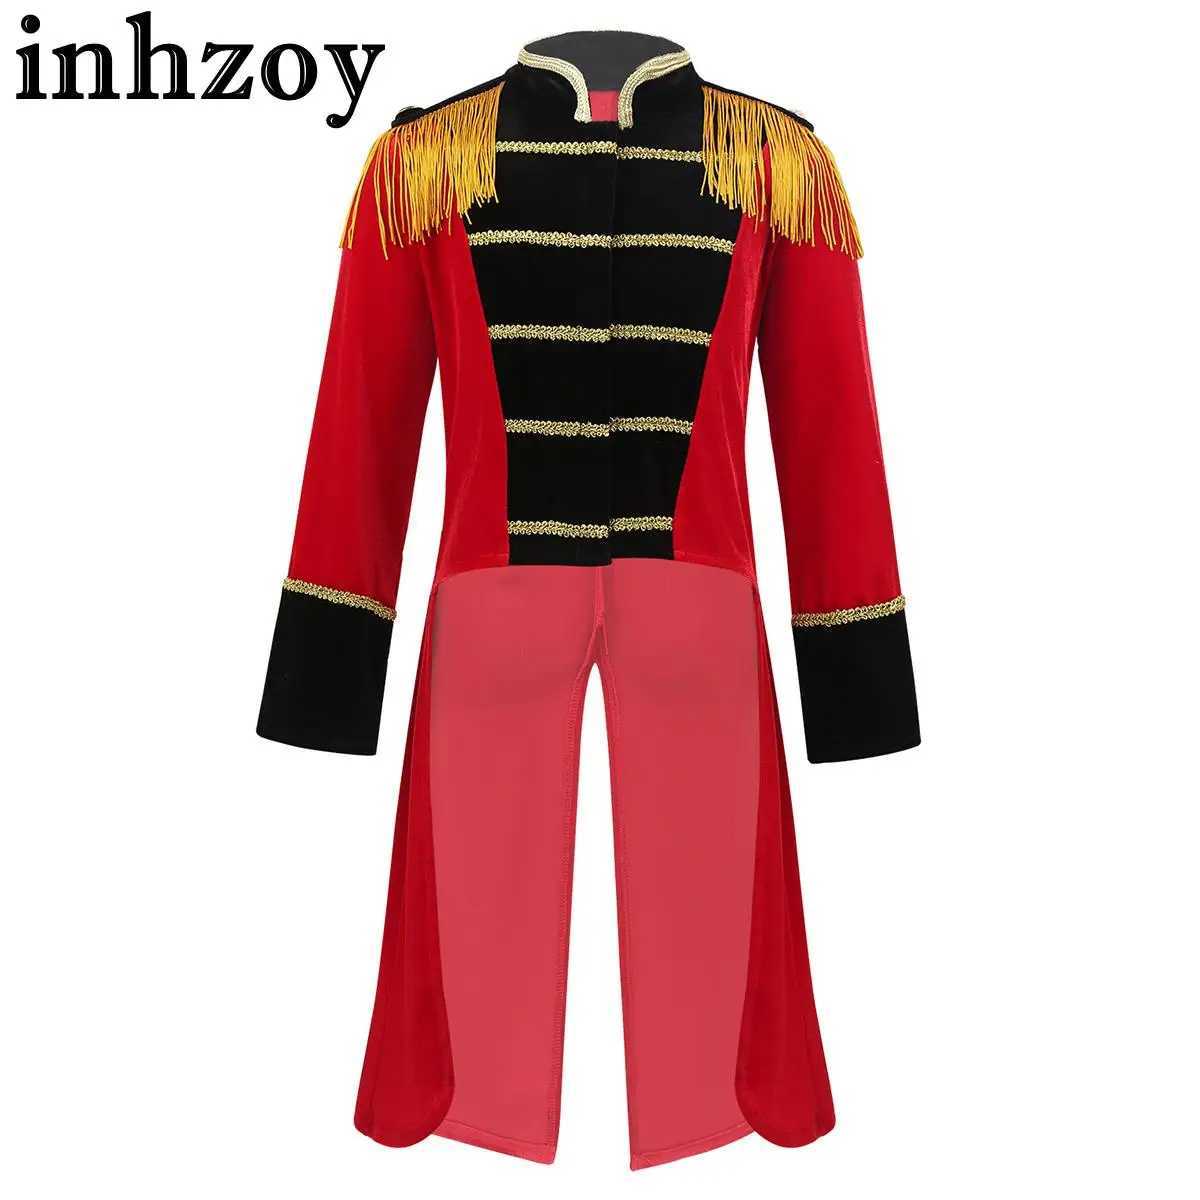 Cosplay Kids Boys Circus Ringmaster Costume Halloween Cosplay Party Outfit fringes Gold Timmings Tailcoat Jacket Tops för Performancel2405